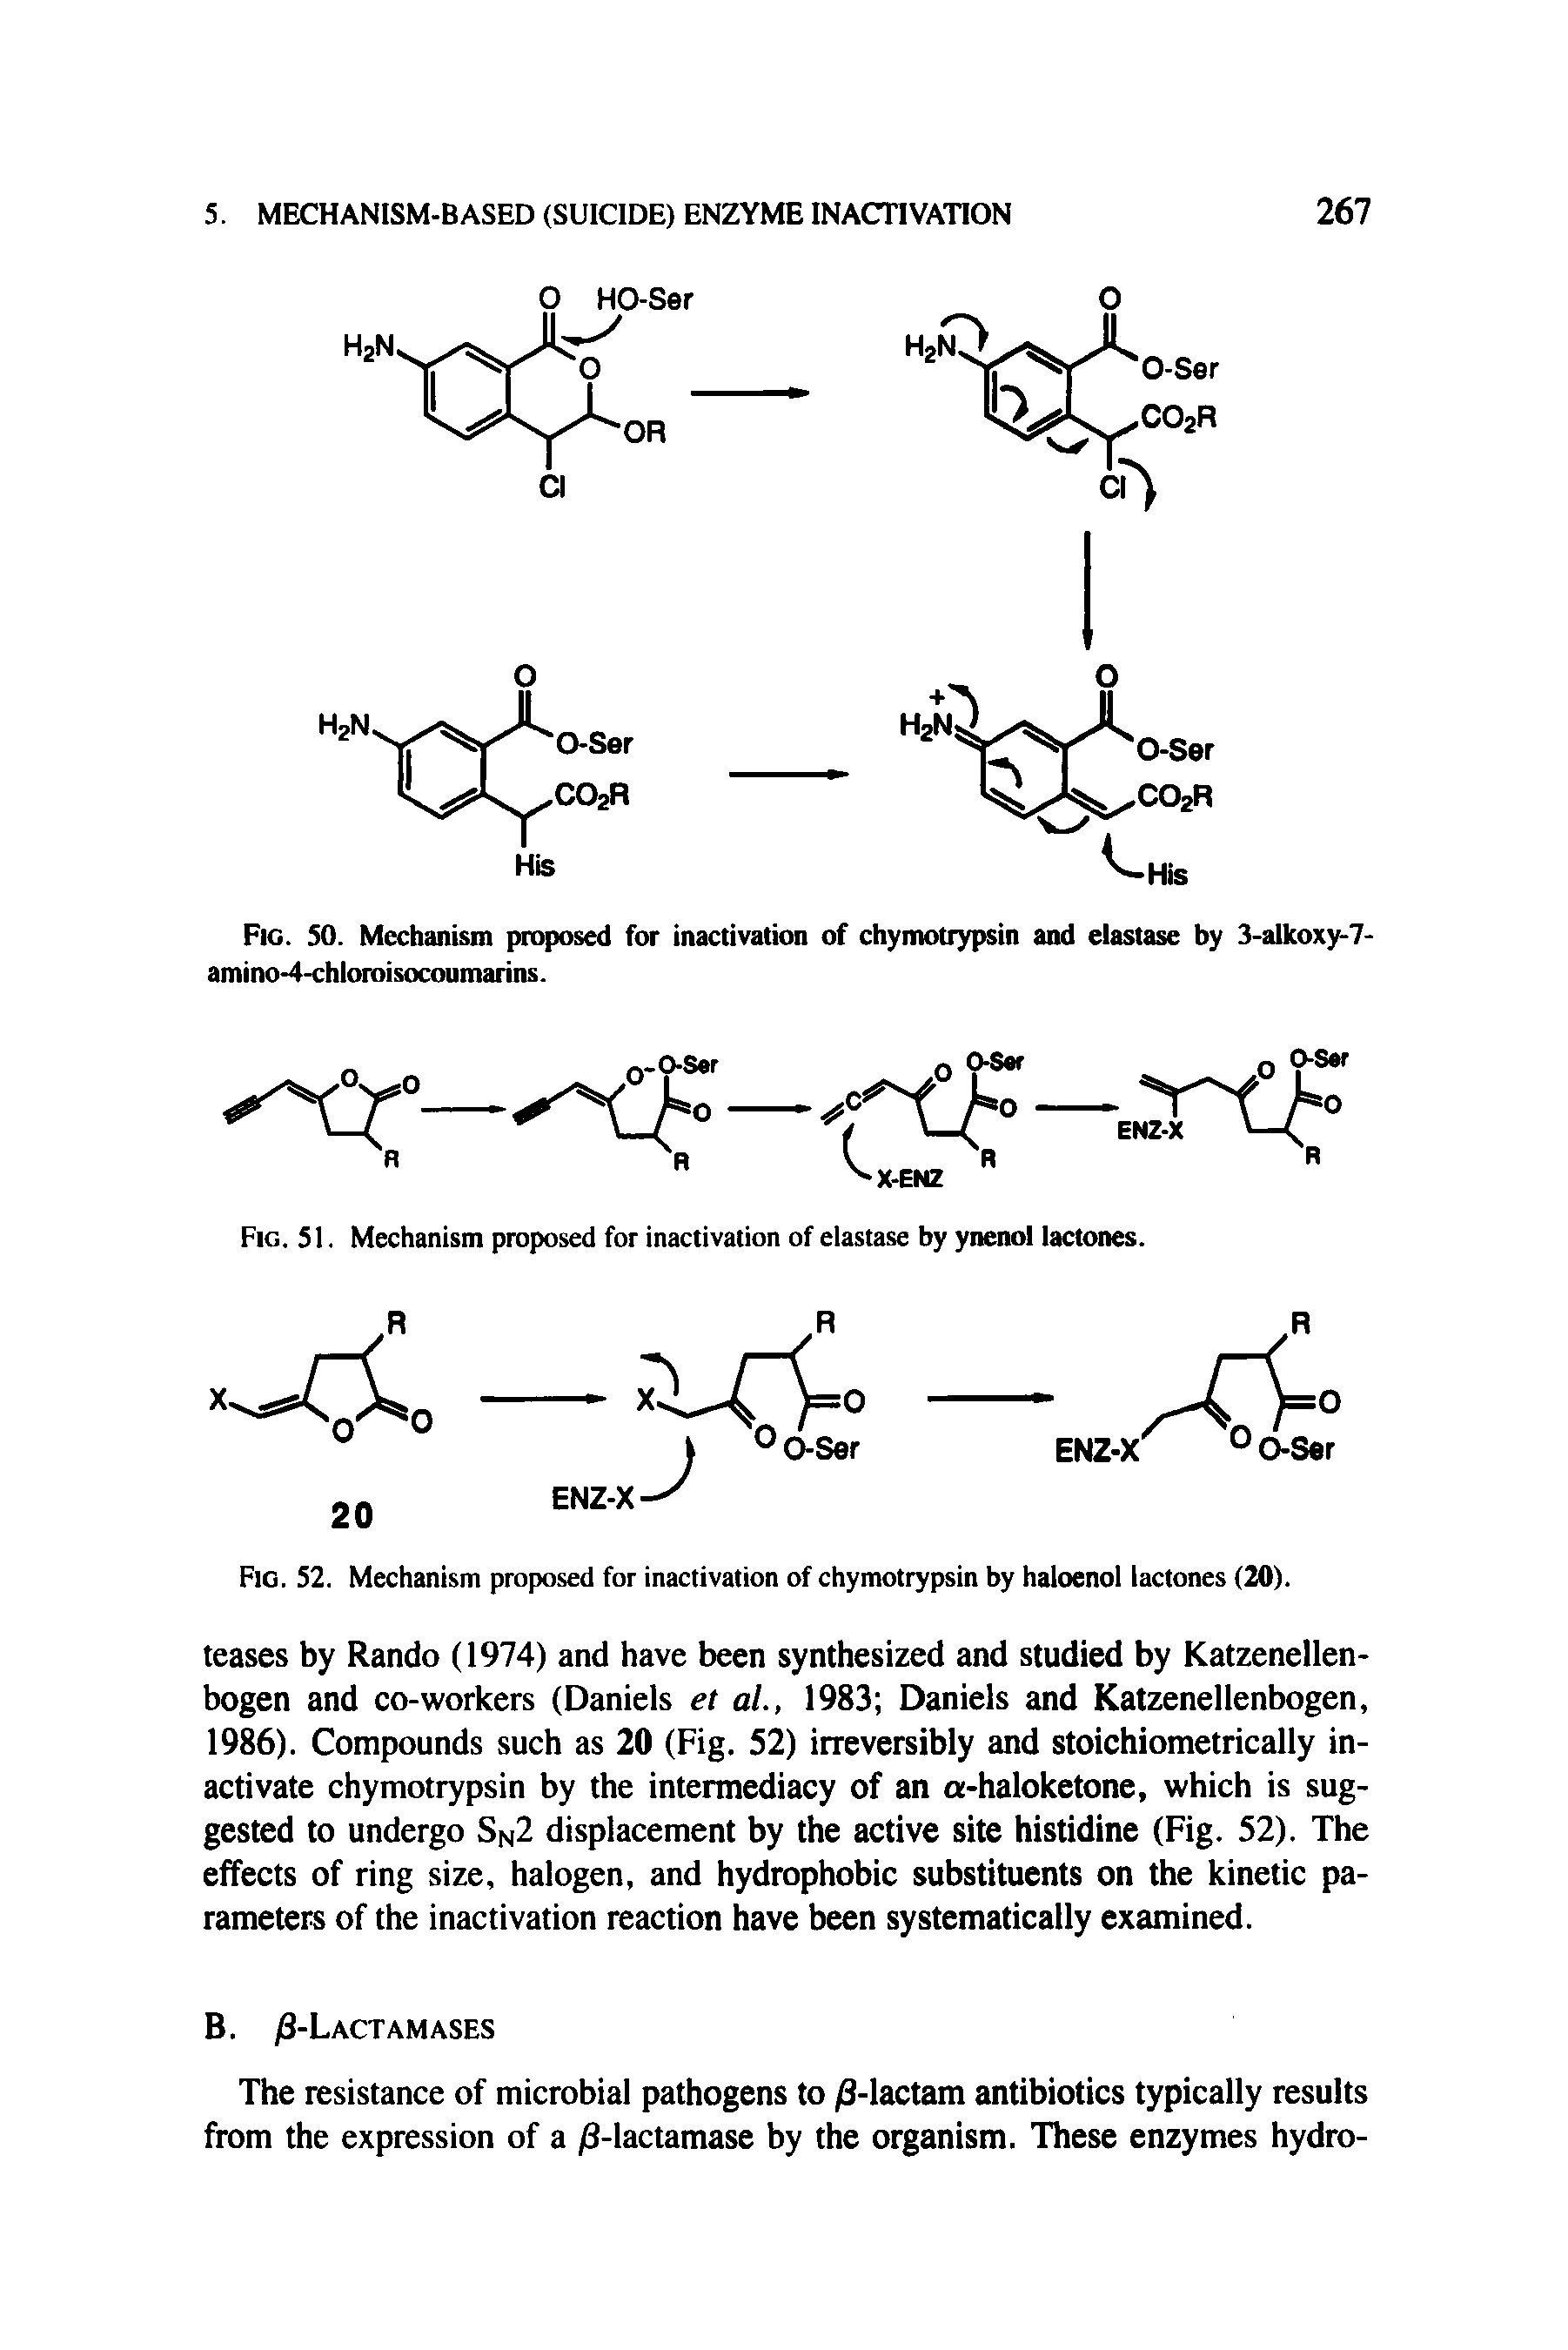 Fig. S2. Mechanism proposed for inactivation of chymotrypsin by haloenol lactones (20).